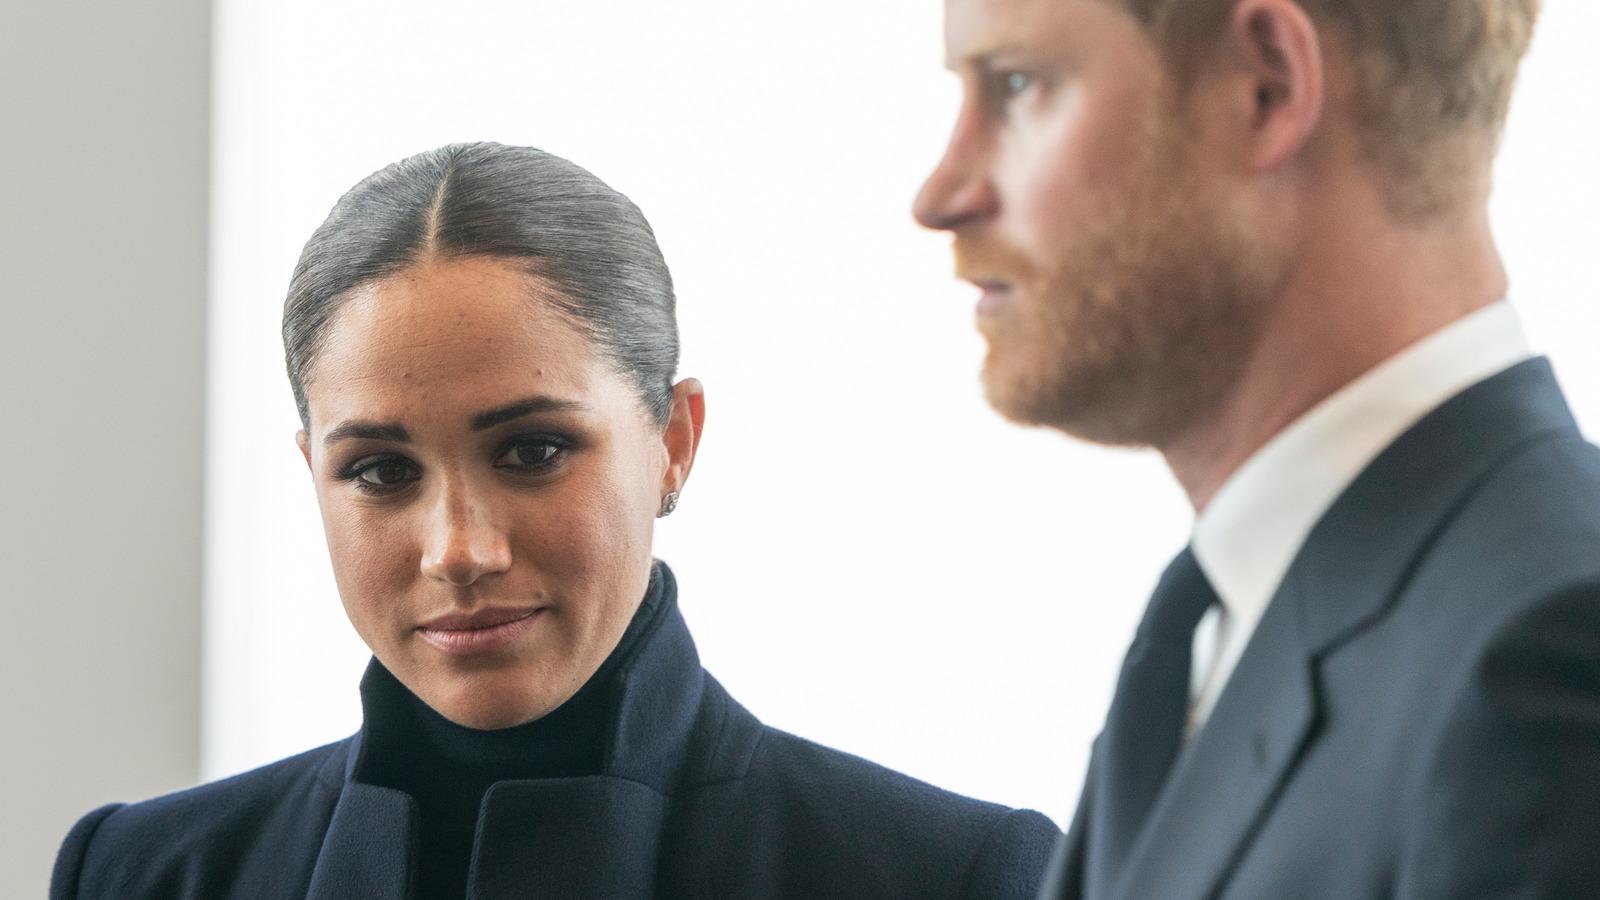 How Royals Are Reacting To Netflix's Harry & Meghan